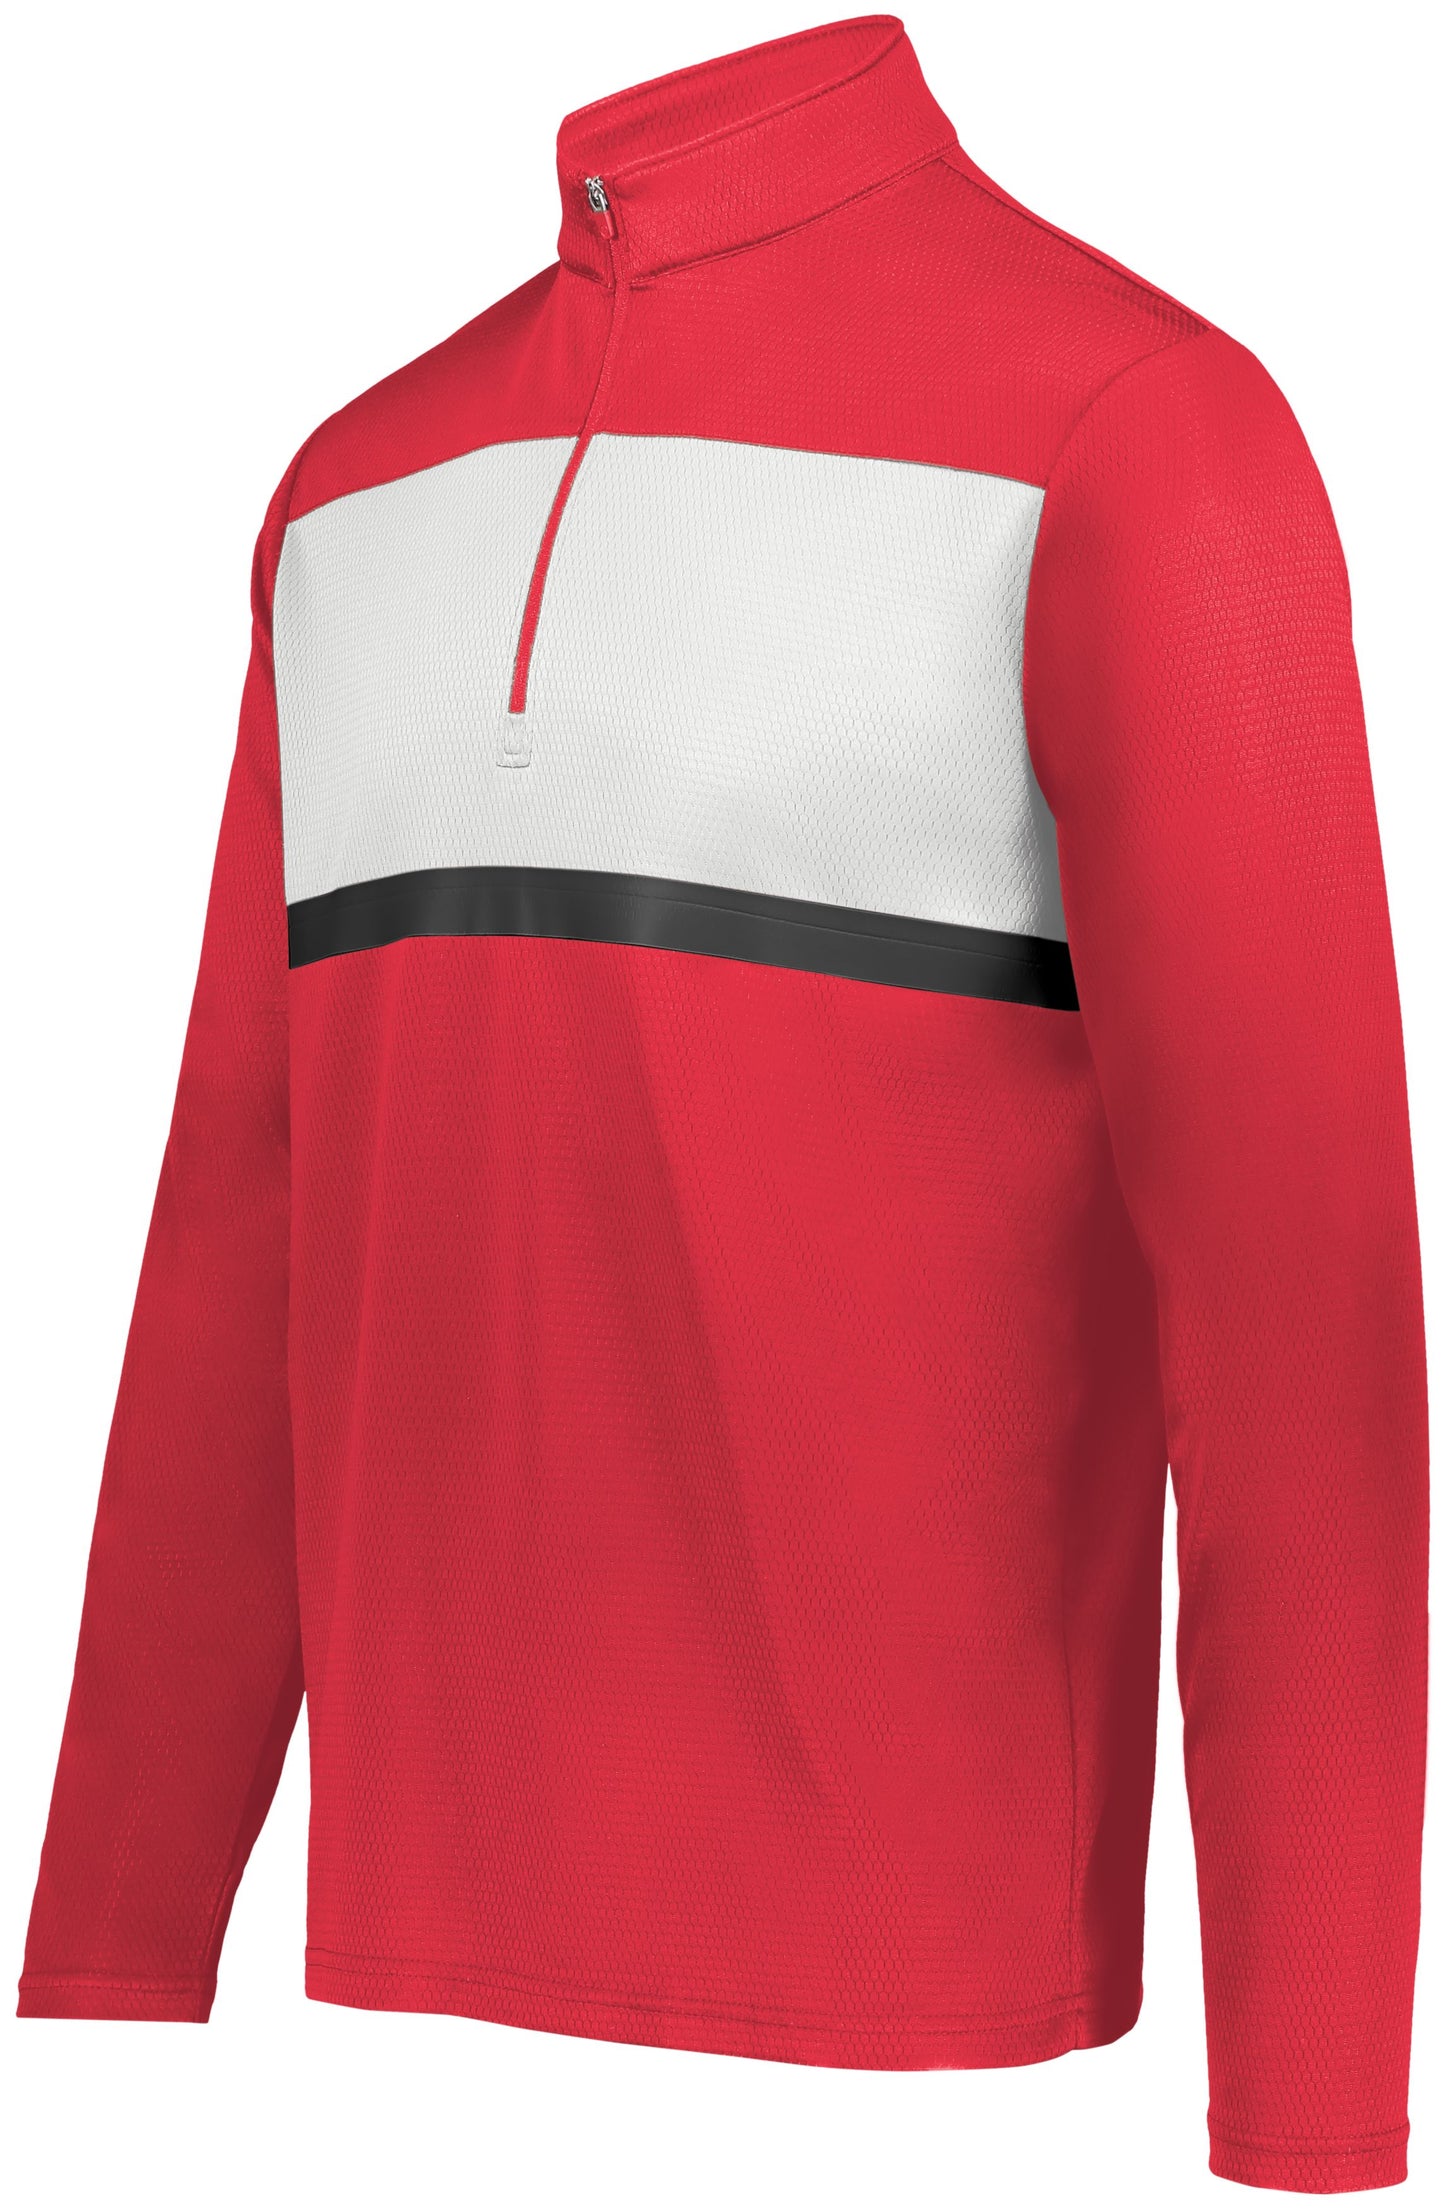 HOLLOWAY - YOUTH PRISM BOLD 1/4 ZIP PULLOVER